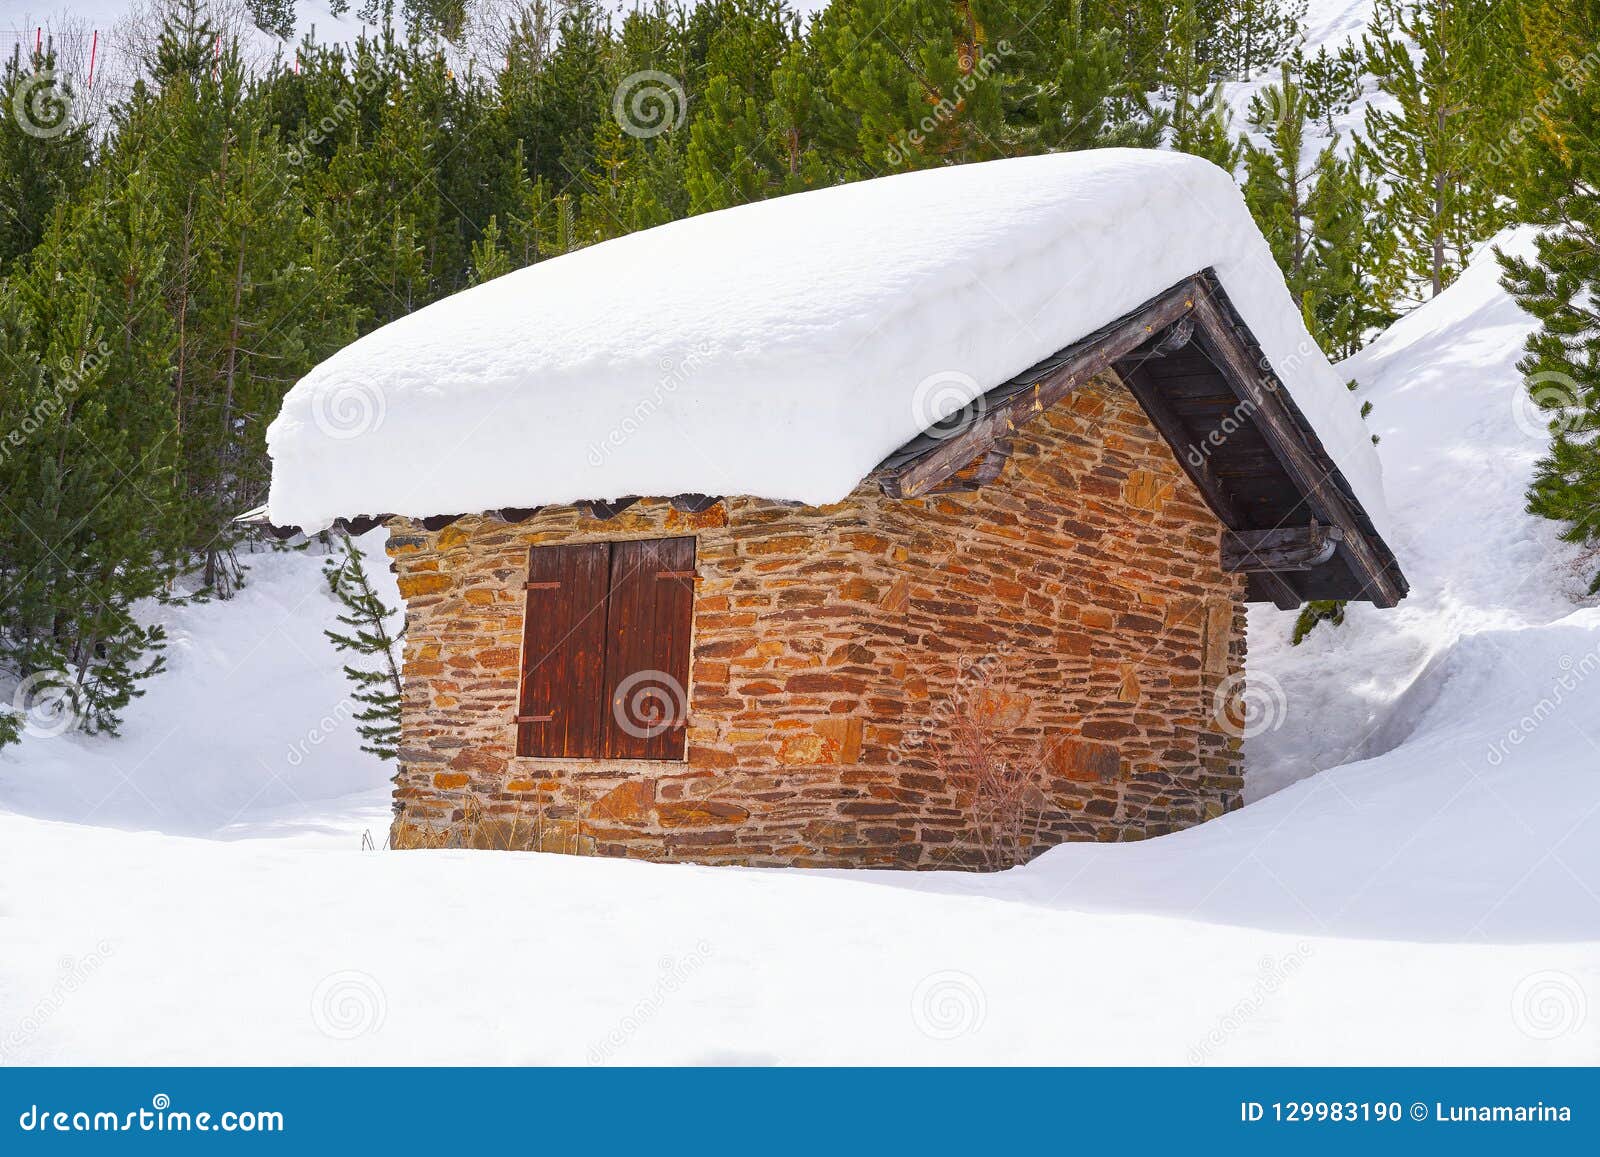 pal snow house in andorra pyrenees